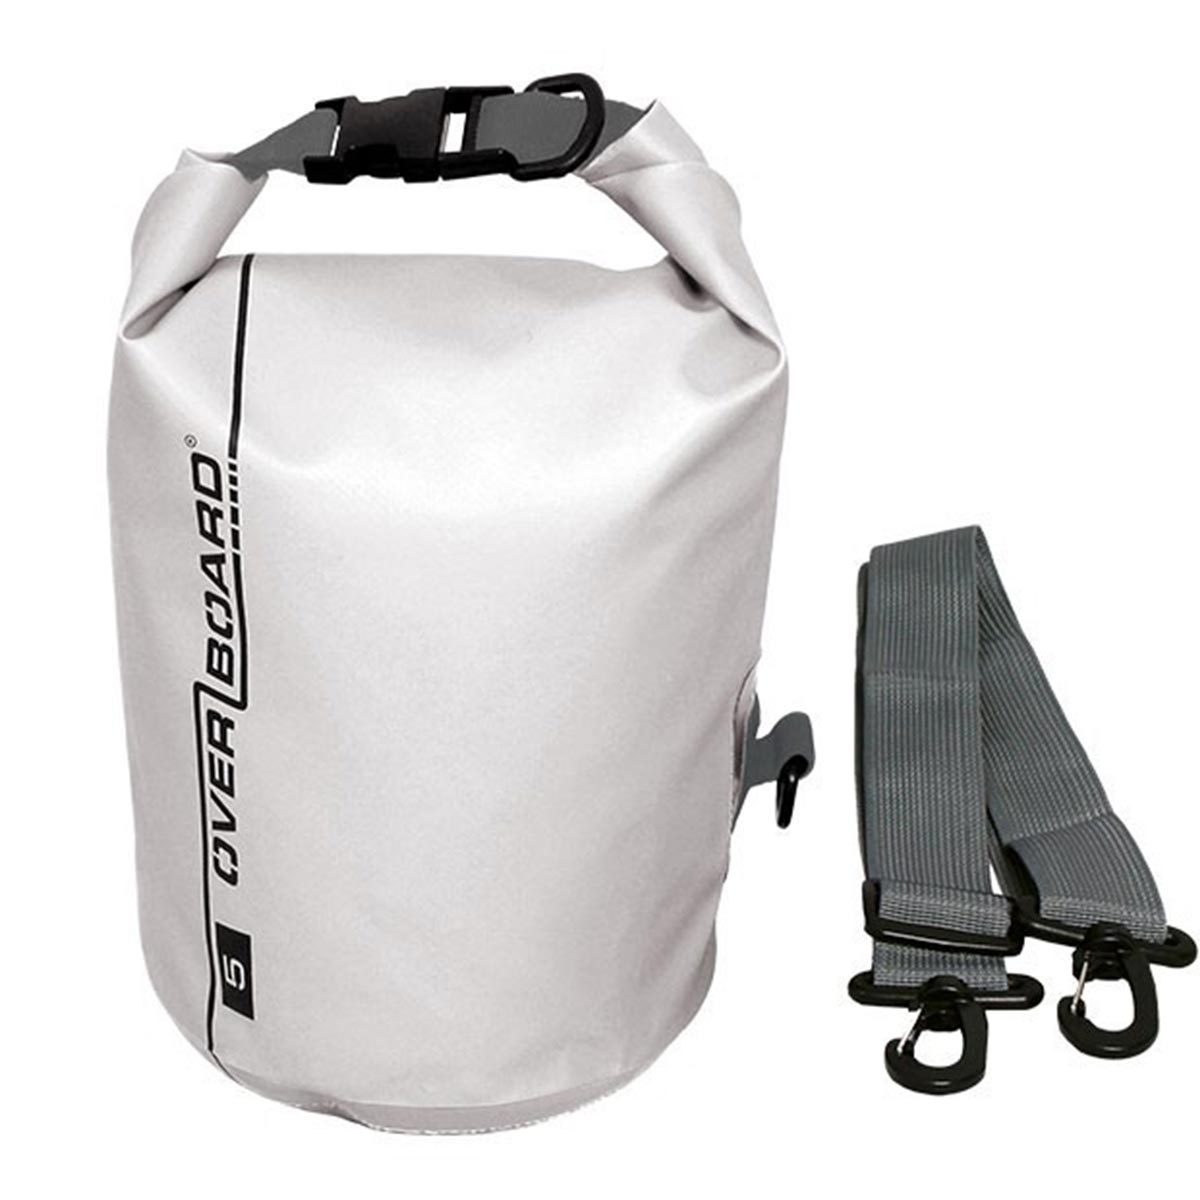 Overboard 5 Litre Dry Tube Bag Bags, Packs and Cases Overboard White Tactical Gear Supplier Tactical Distributors Australia